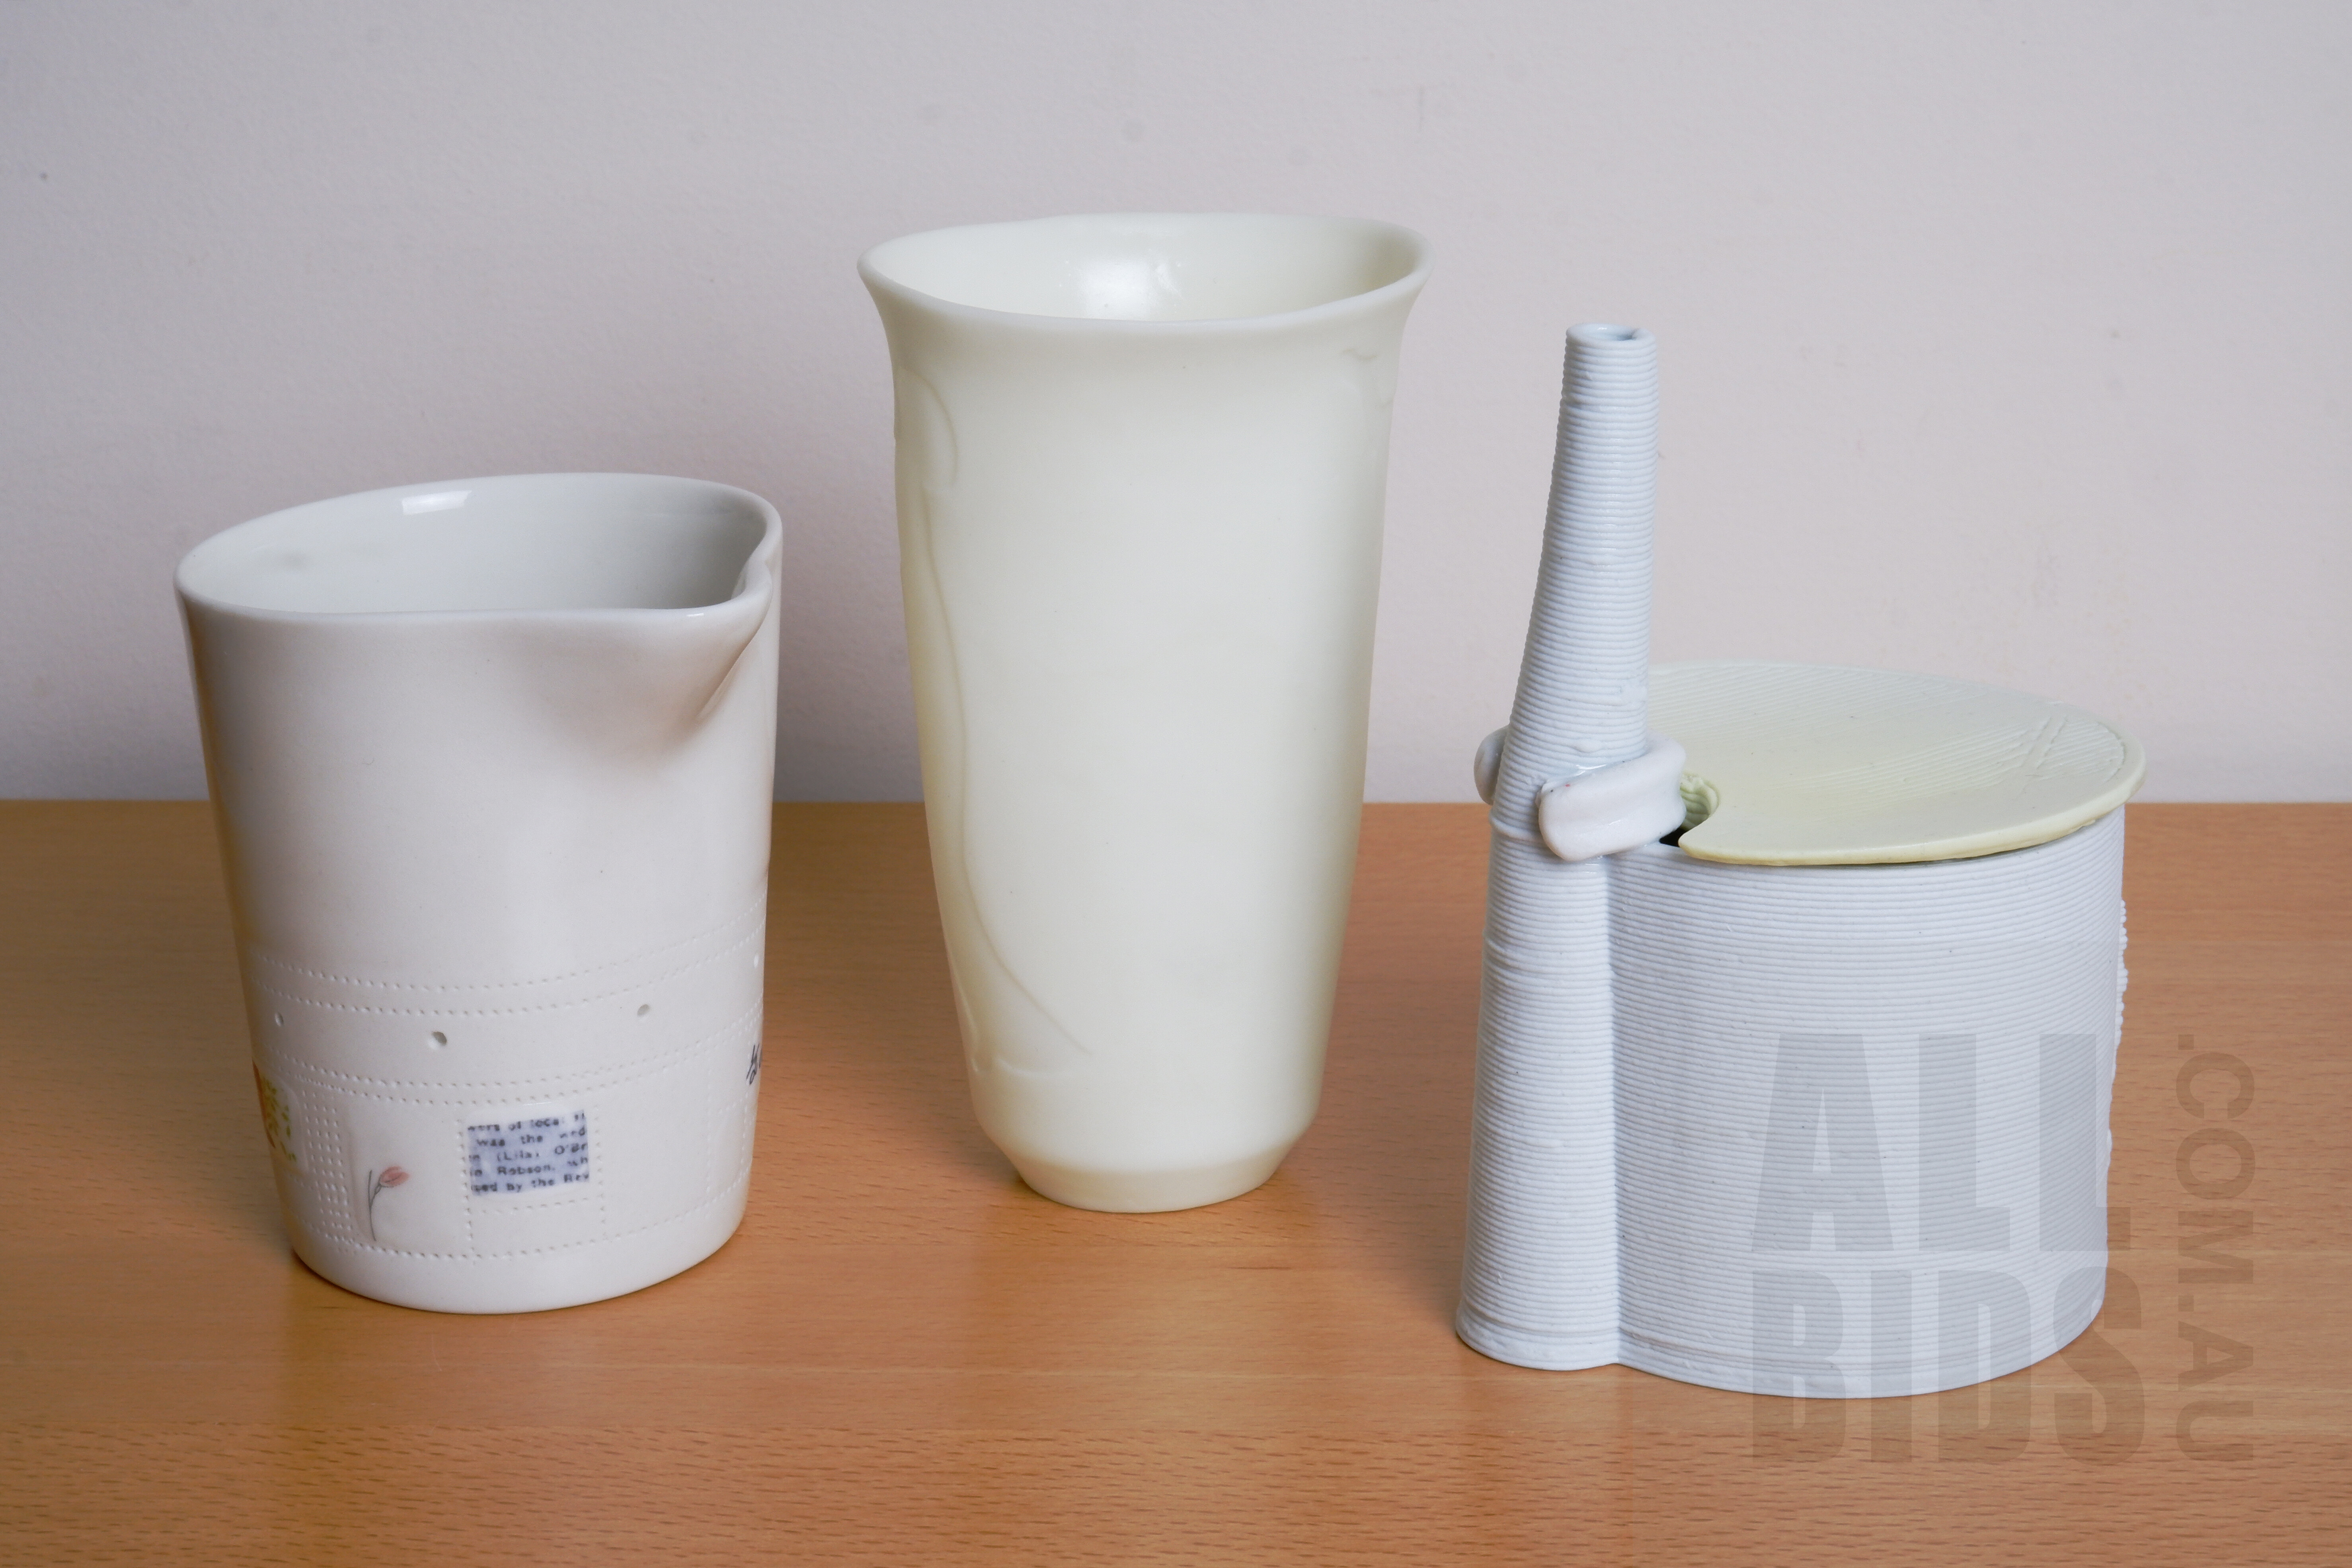 'Mel Robson Ceramic Measuring Cup, Studio Ceramic Beaker with Lithophane Praying Woman Initialled SR and Another Studio Ceramic Vessel'